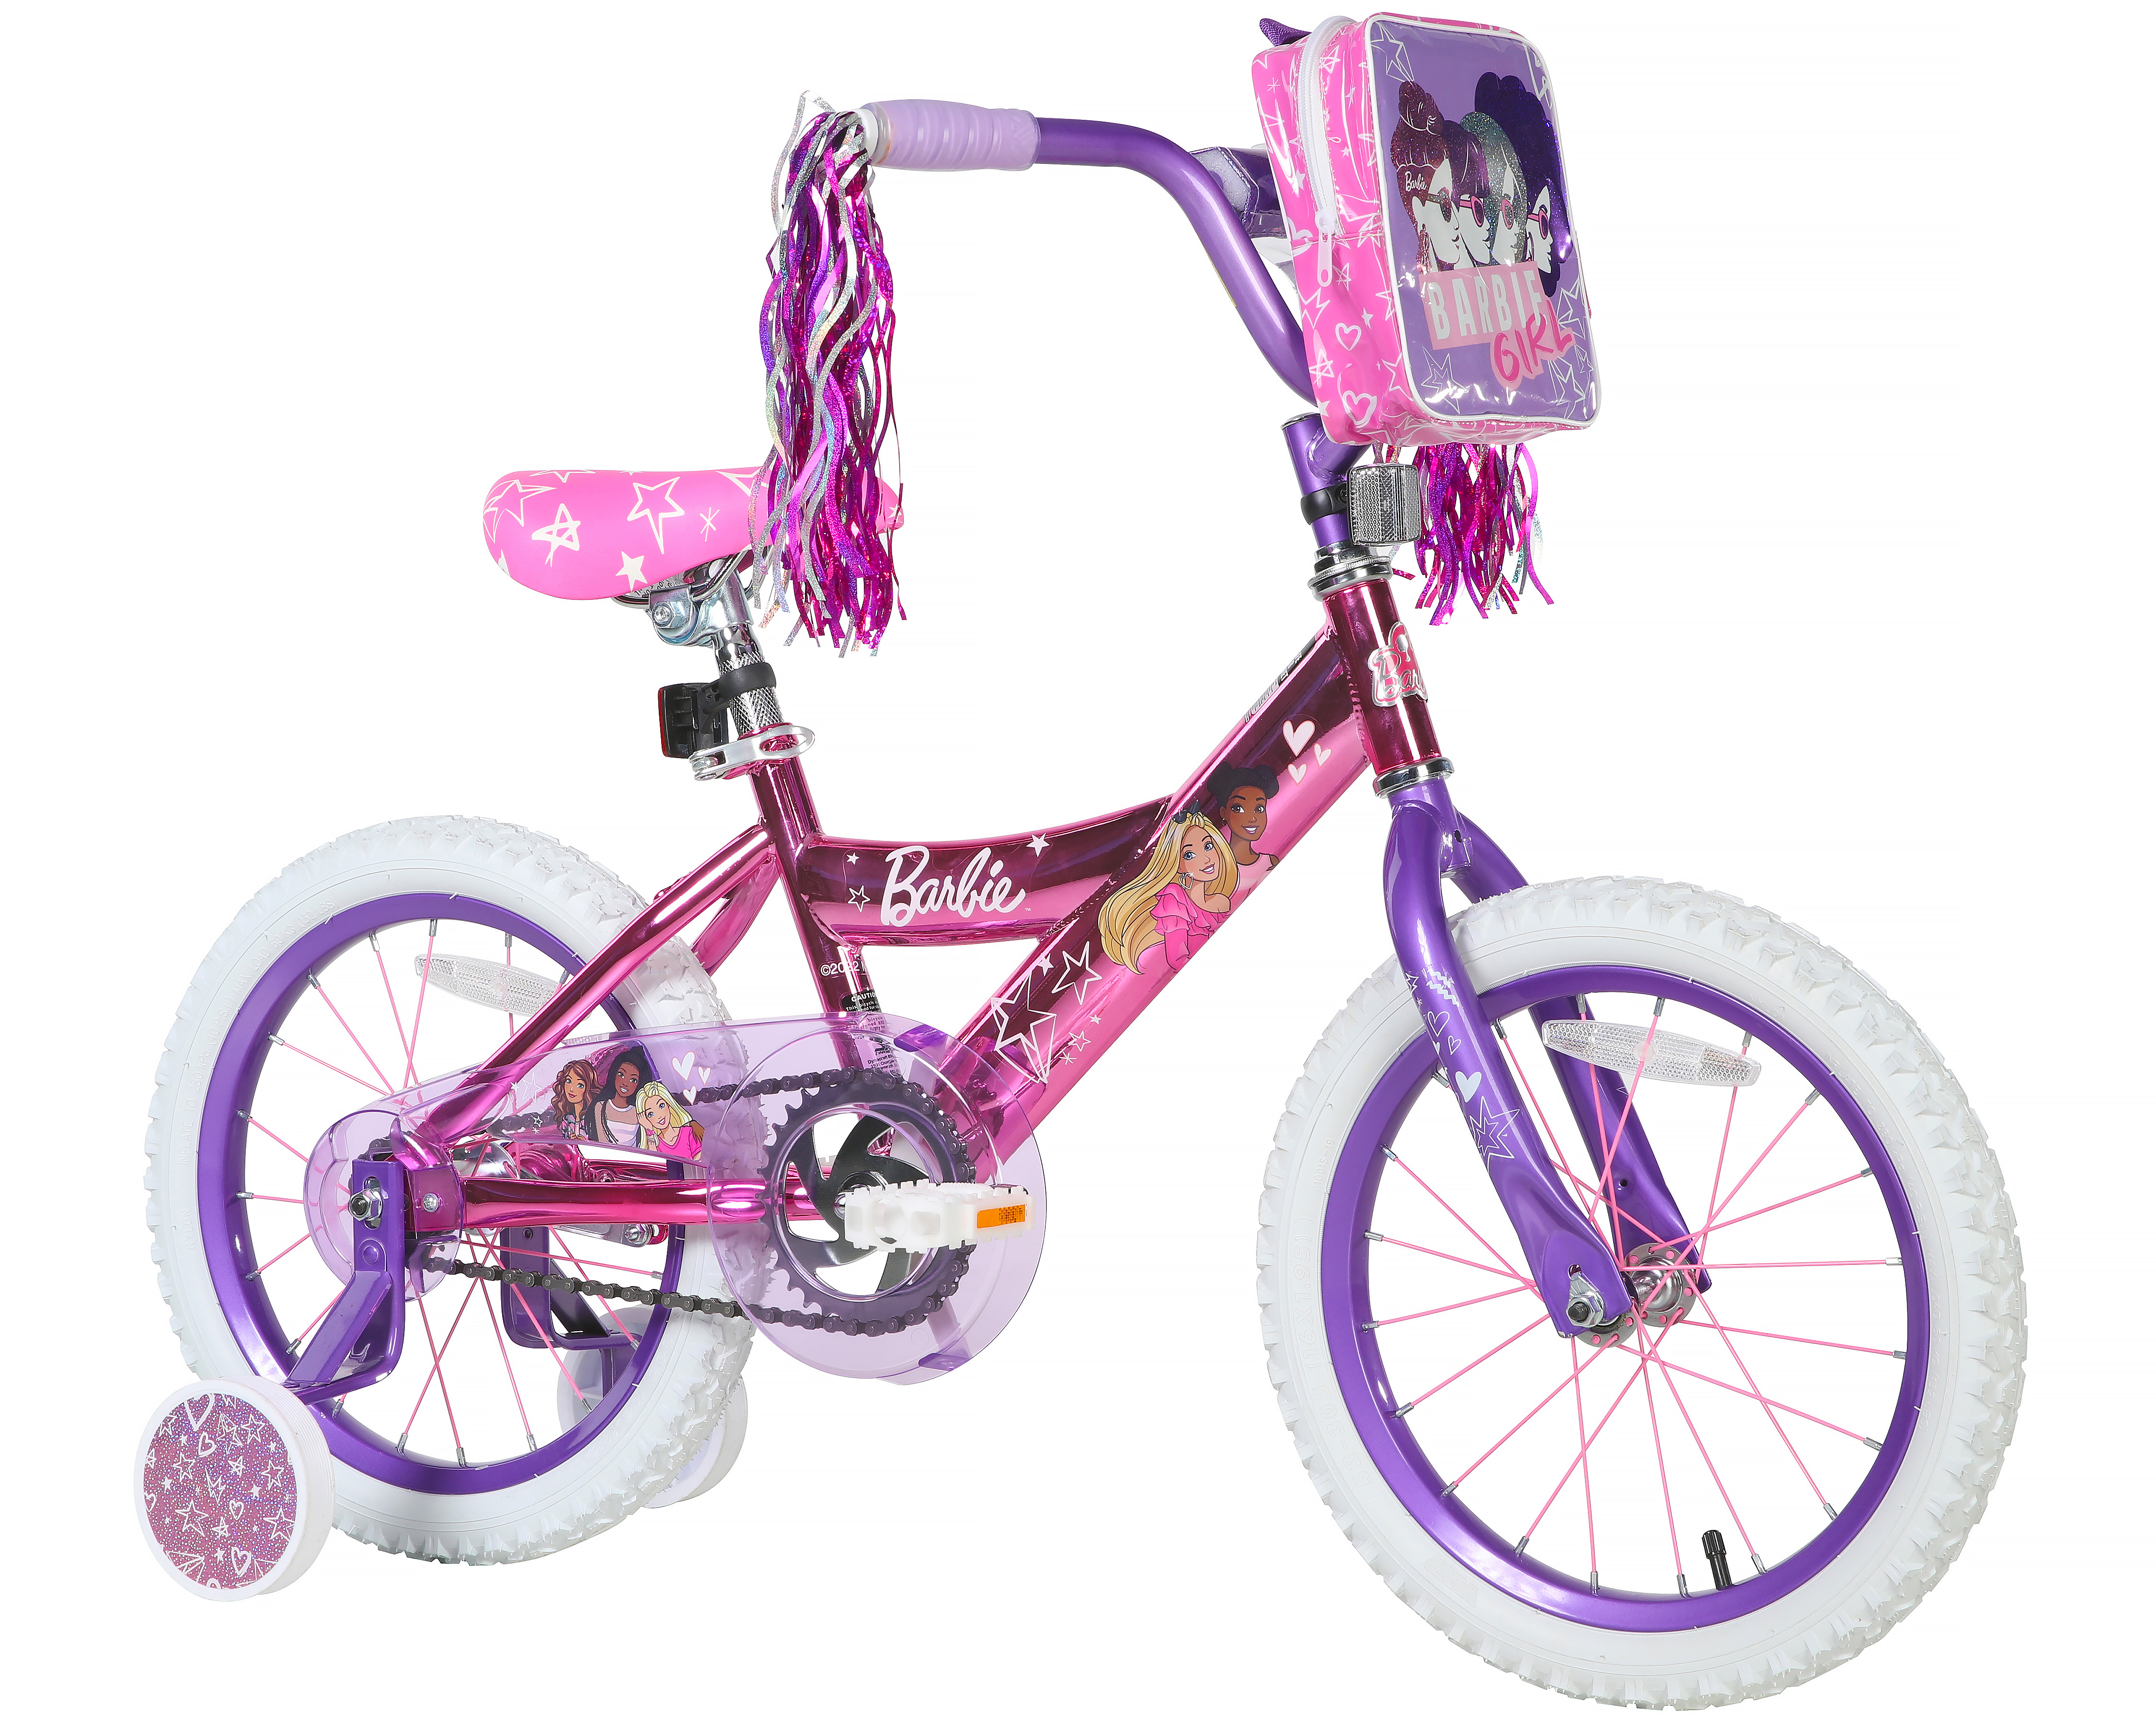 Dynacraft Barbie 16-inch Girls BMX Bike for Age 5-7 Years, Pink - image 2 of 8